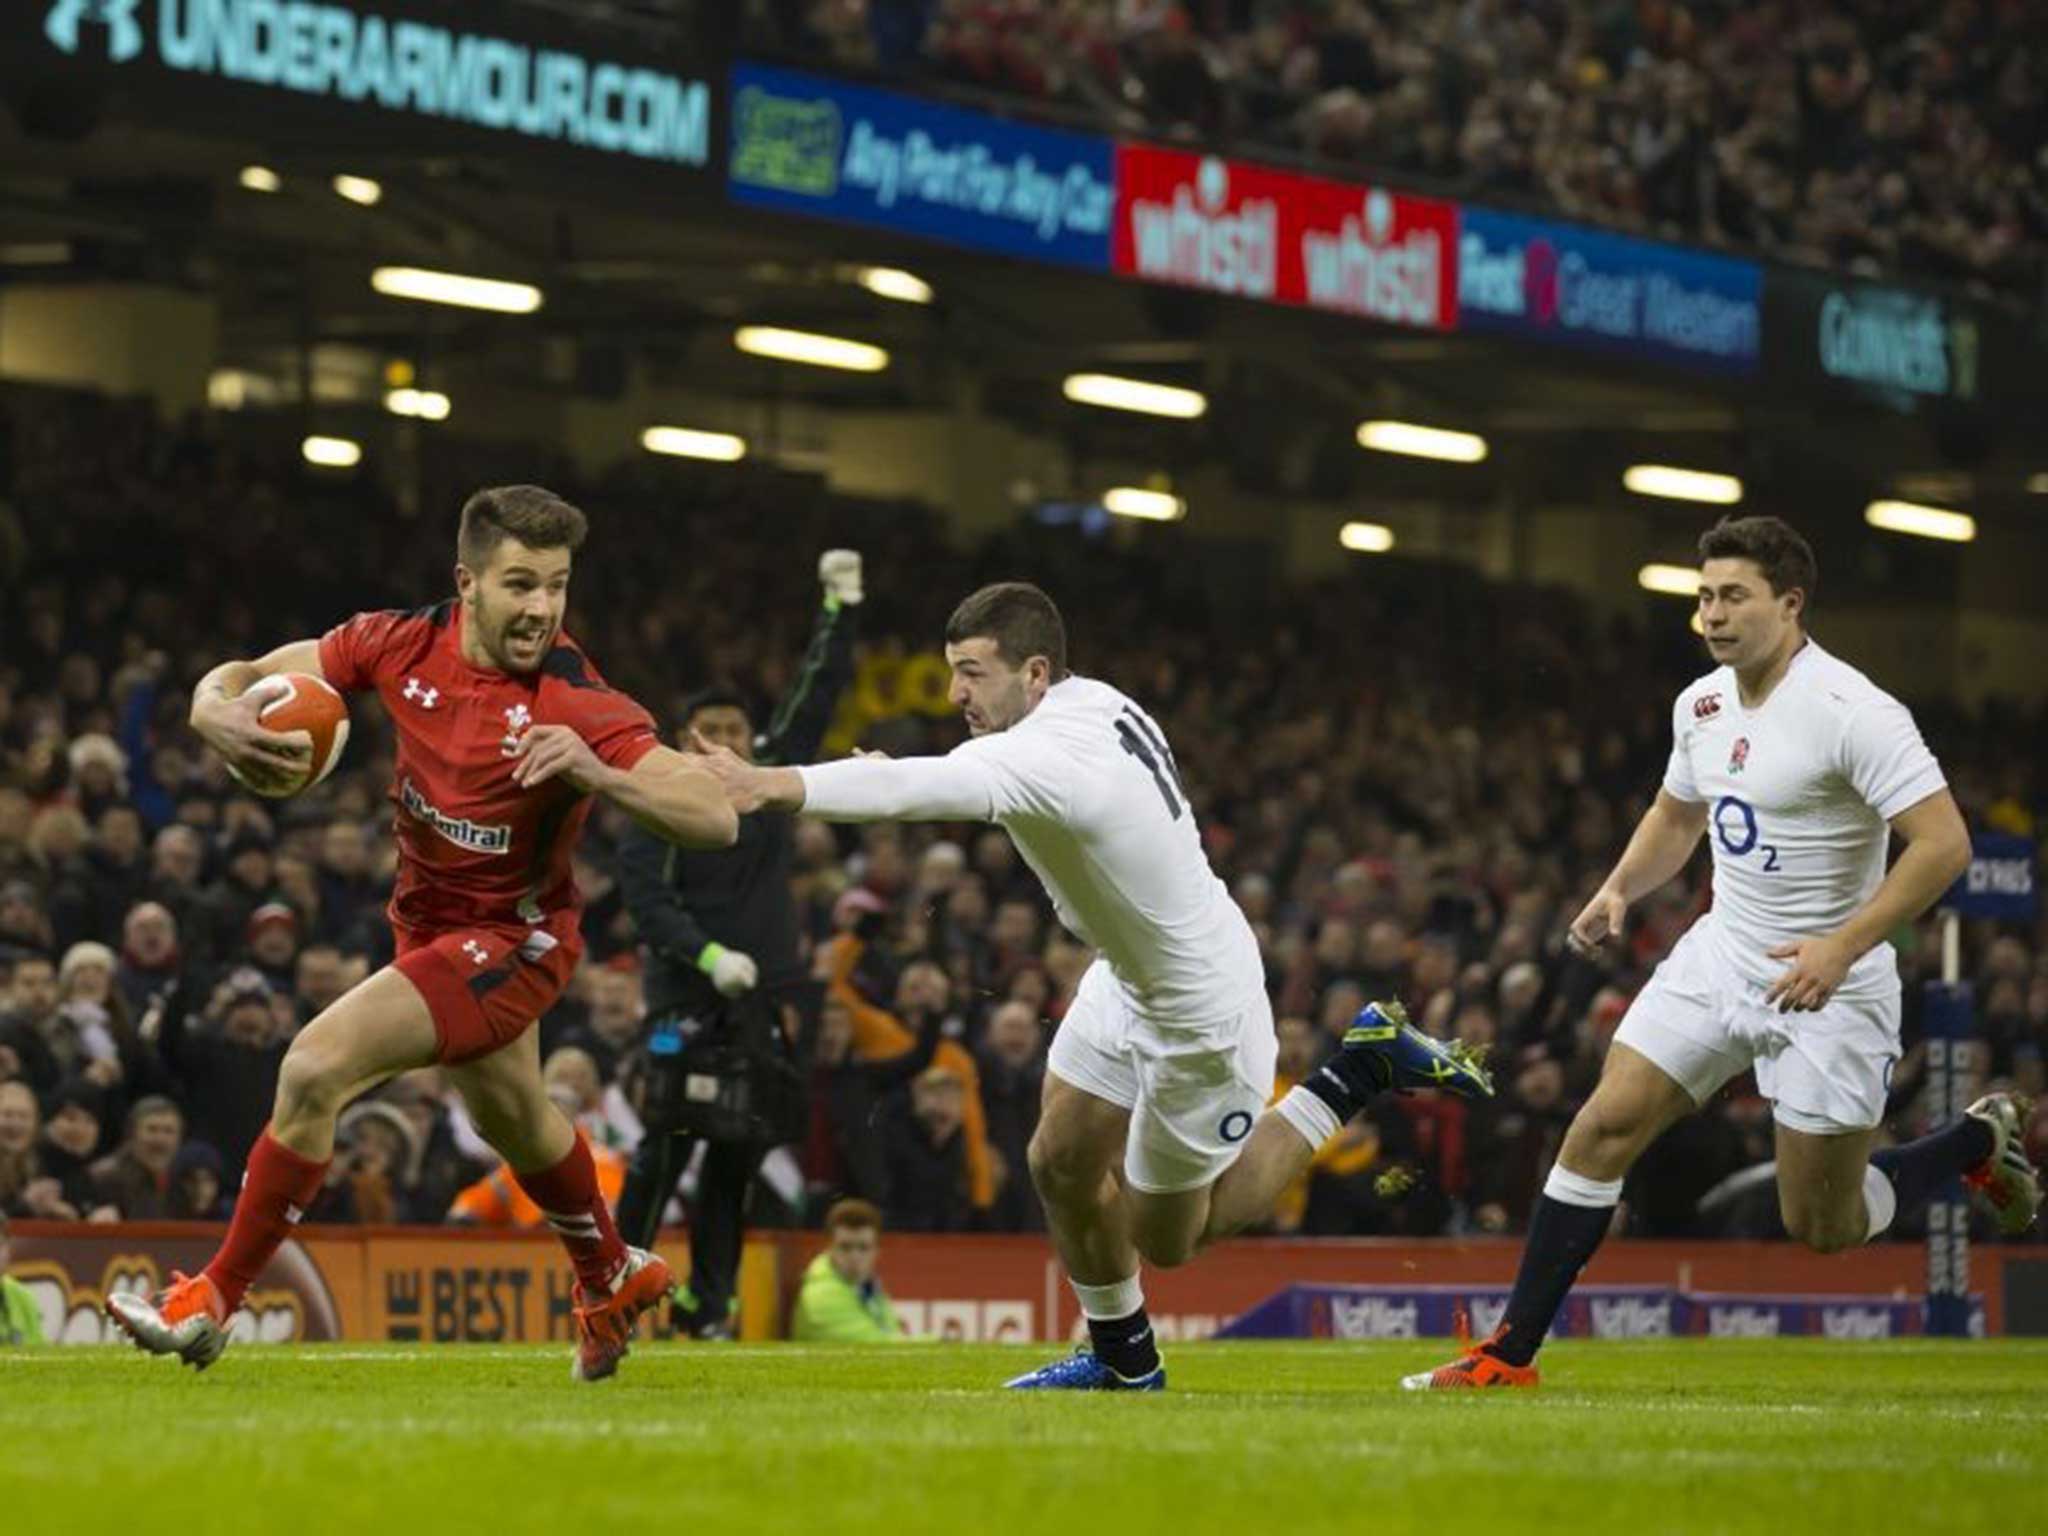 Wales’ Rhys Webb avoids an attempted tackle by England’s Jonny May as he heads over to score at the Millennium Stadium last night